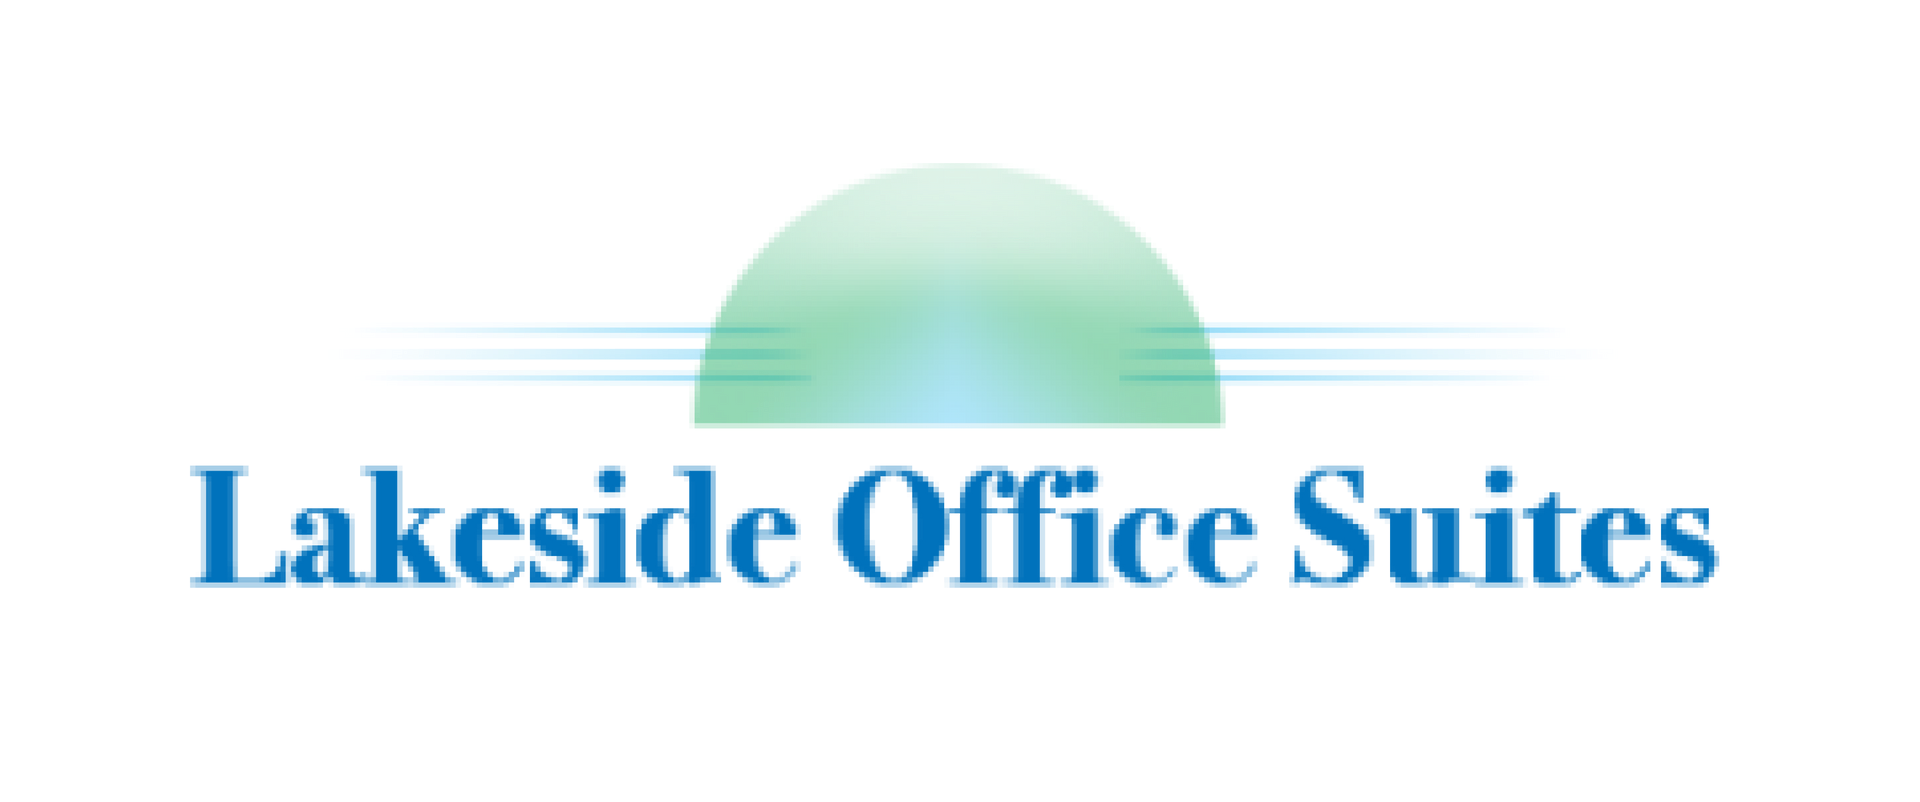 lakeside office suites logo